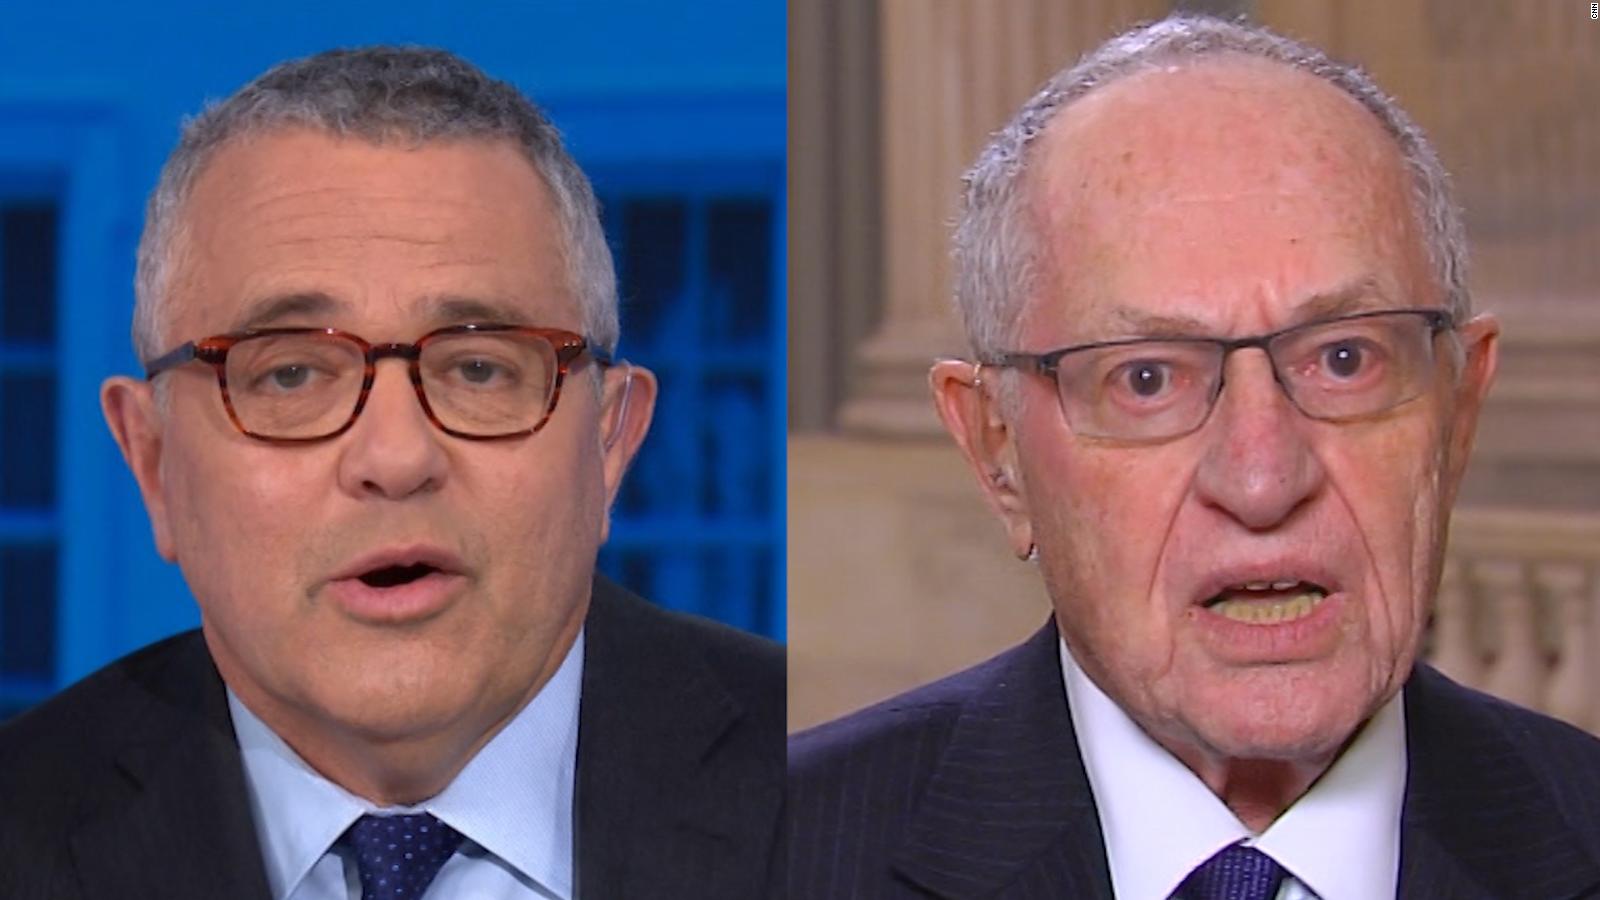 Jeffrey Toobin Confronts Alan Dershowitz With Video Of His Mike Pompeo Interaction Cnn Video 